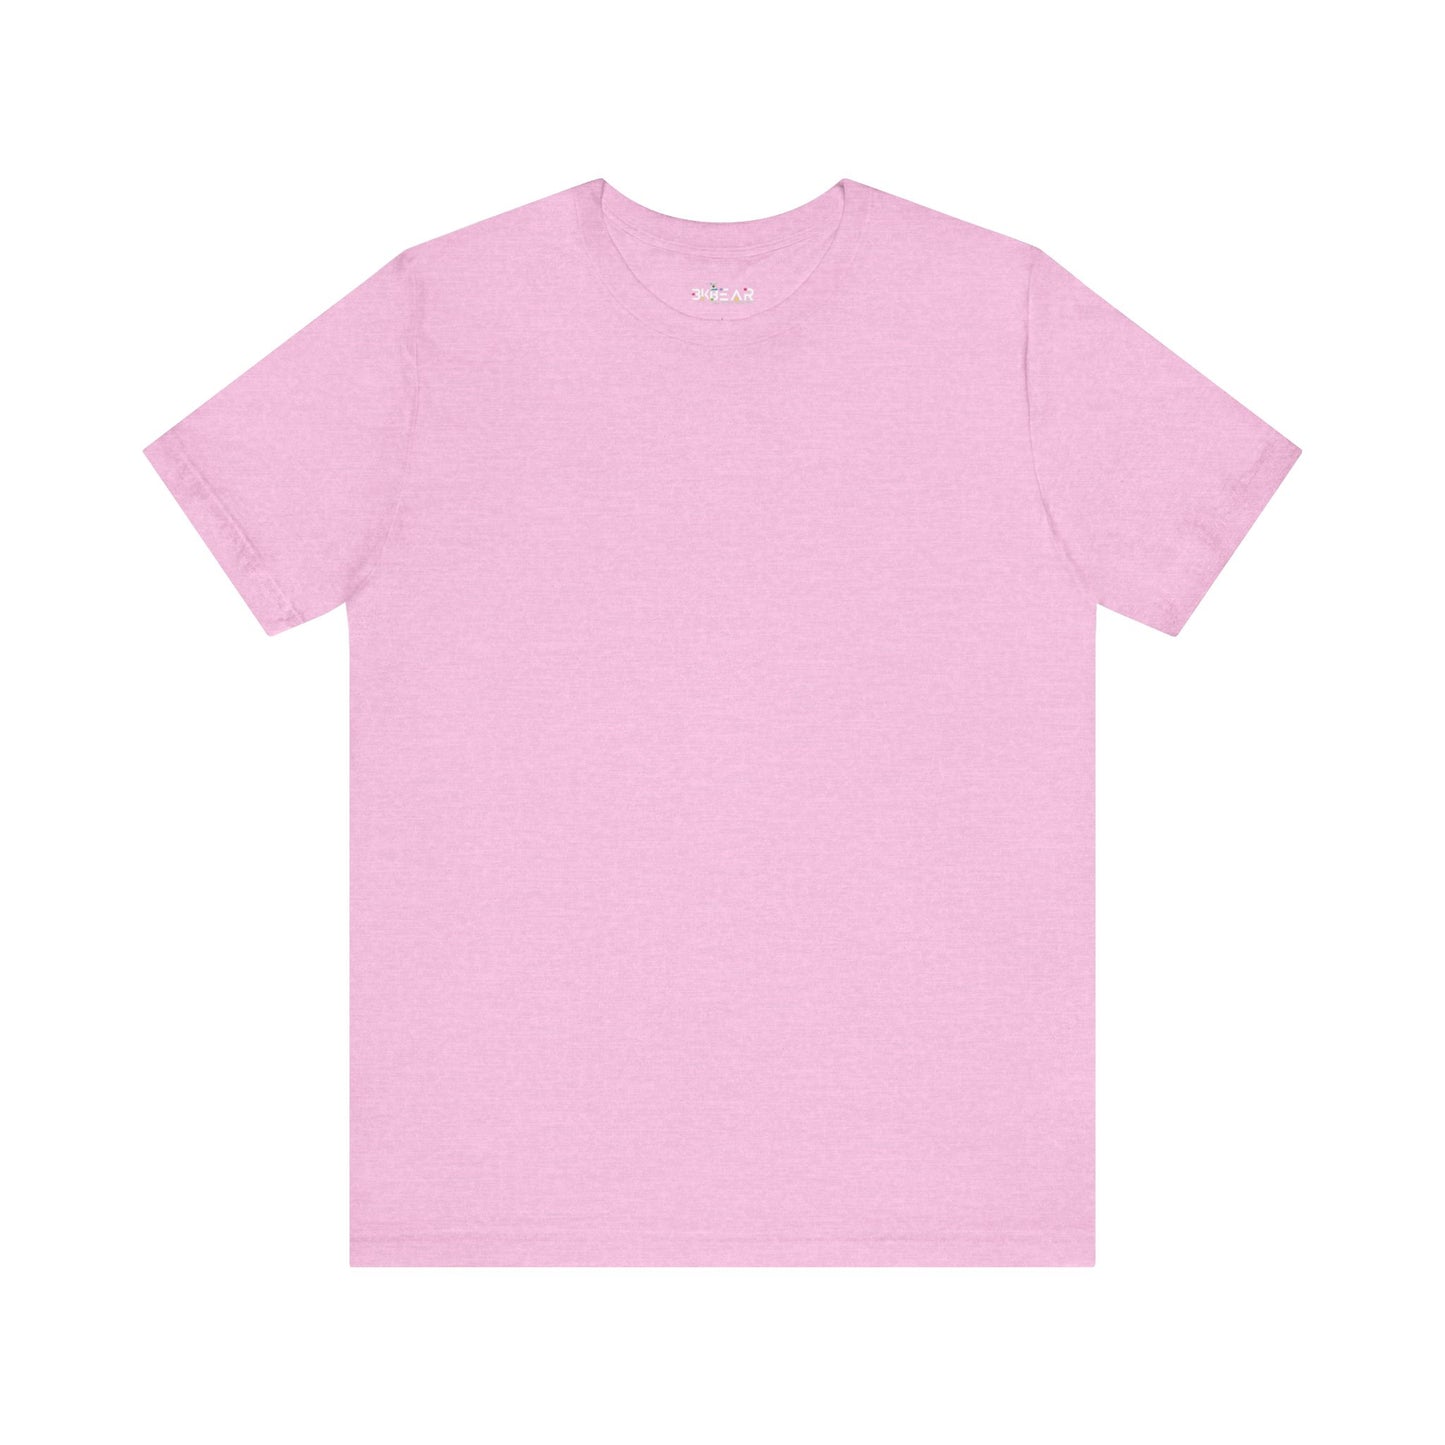 Solid Charity Pink. Unisex Jersey Short Sleeve Tee